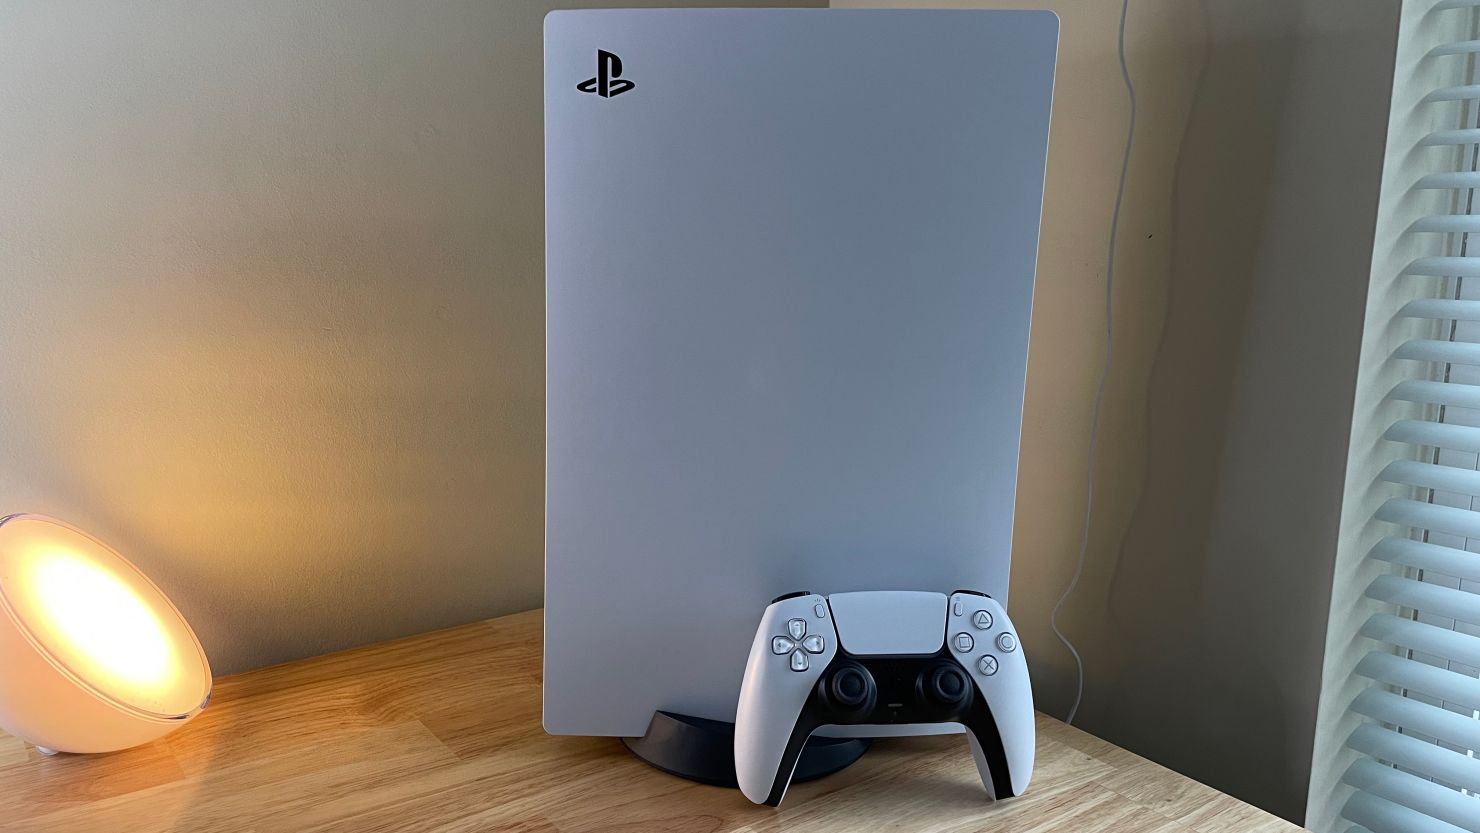 I would give SO much for a PS5 upgrade of this game, despite how